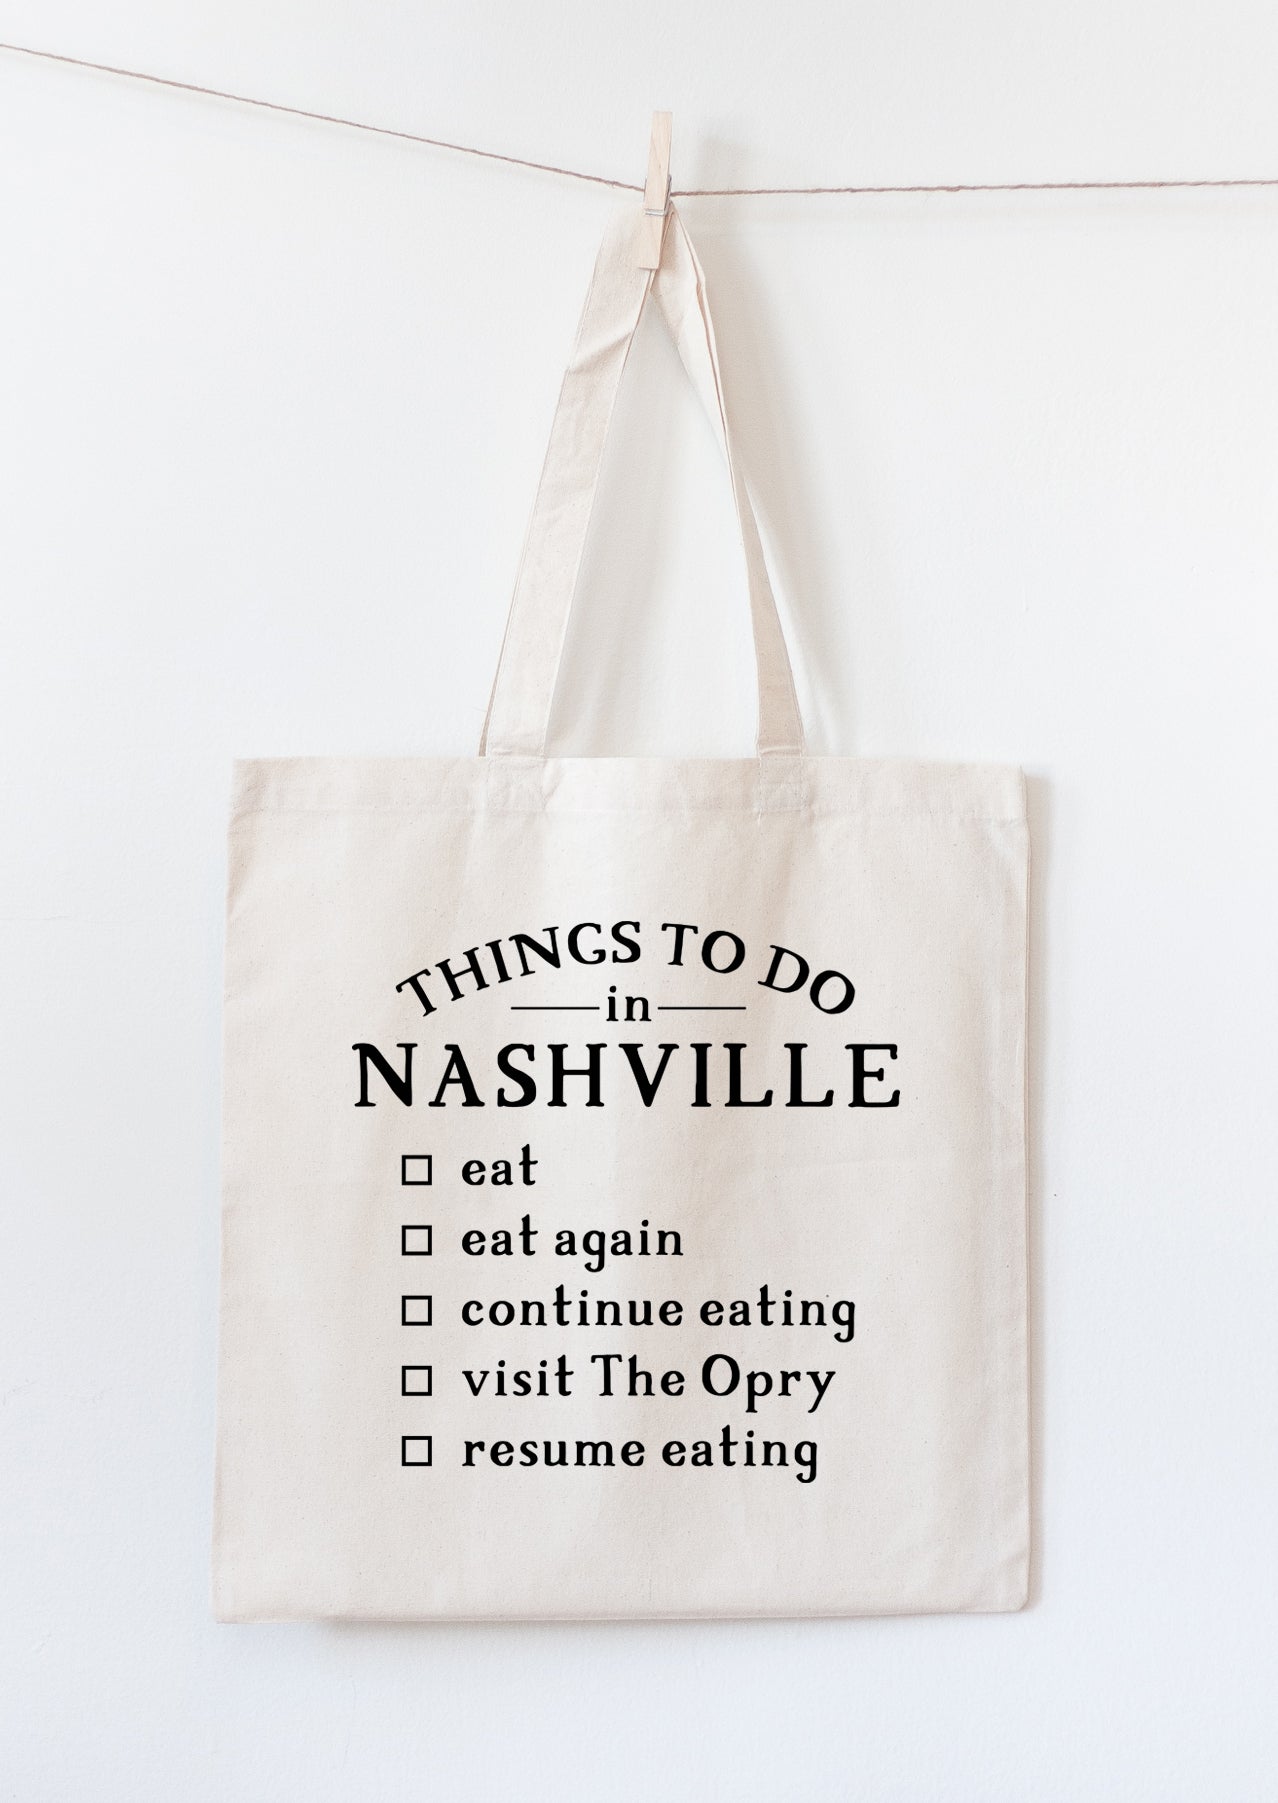 Funny Tote Bag Quotes Bundle Graphic by akdesignstorebd · Creative Fabrica